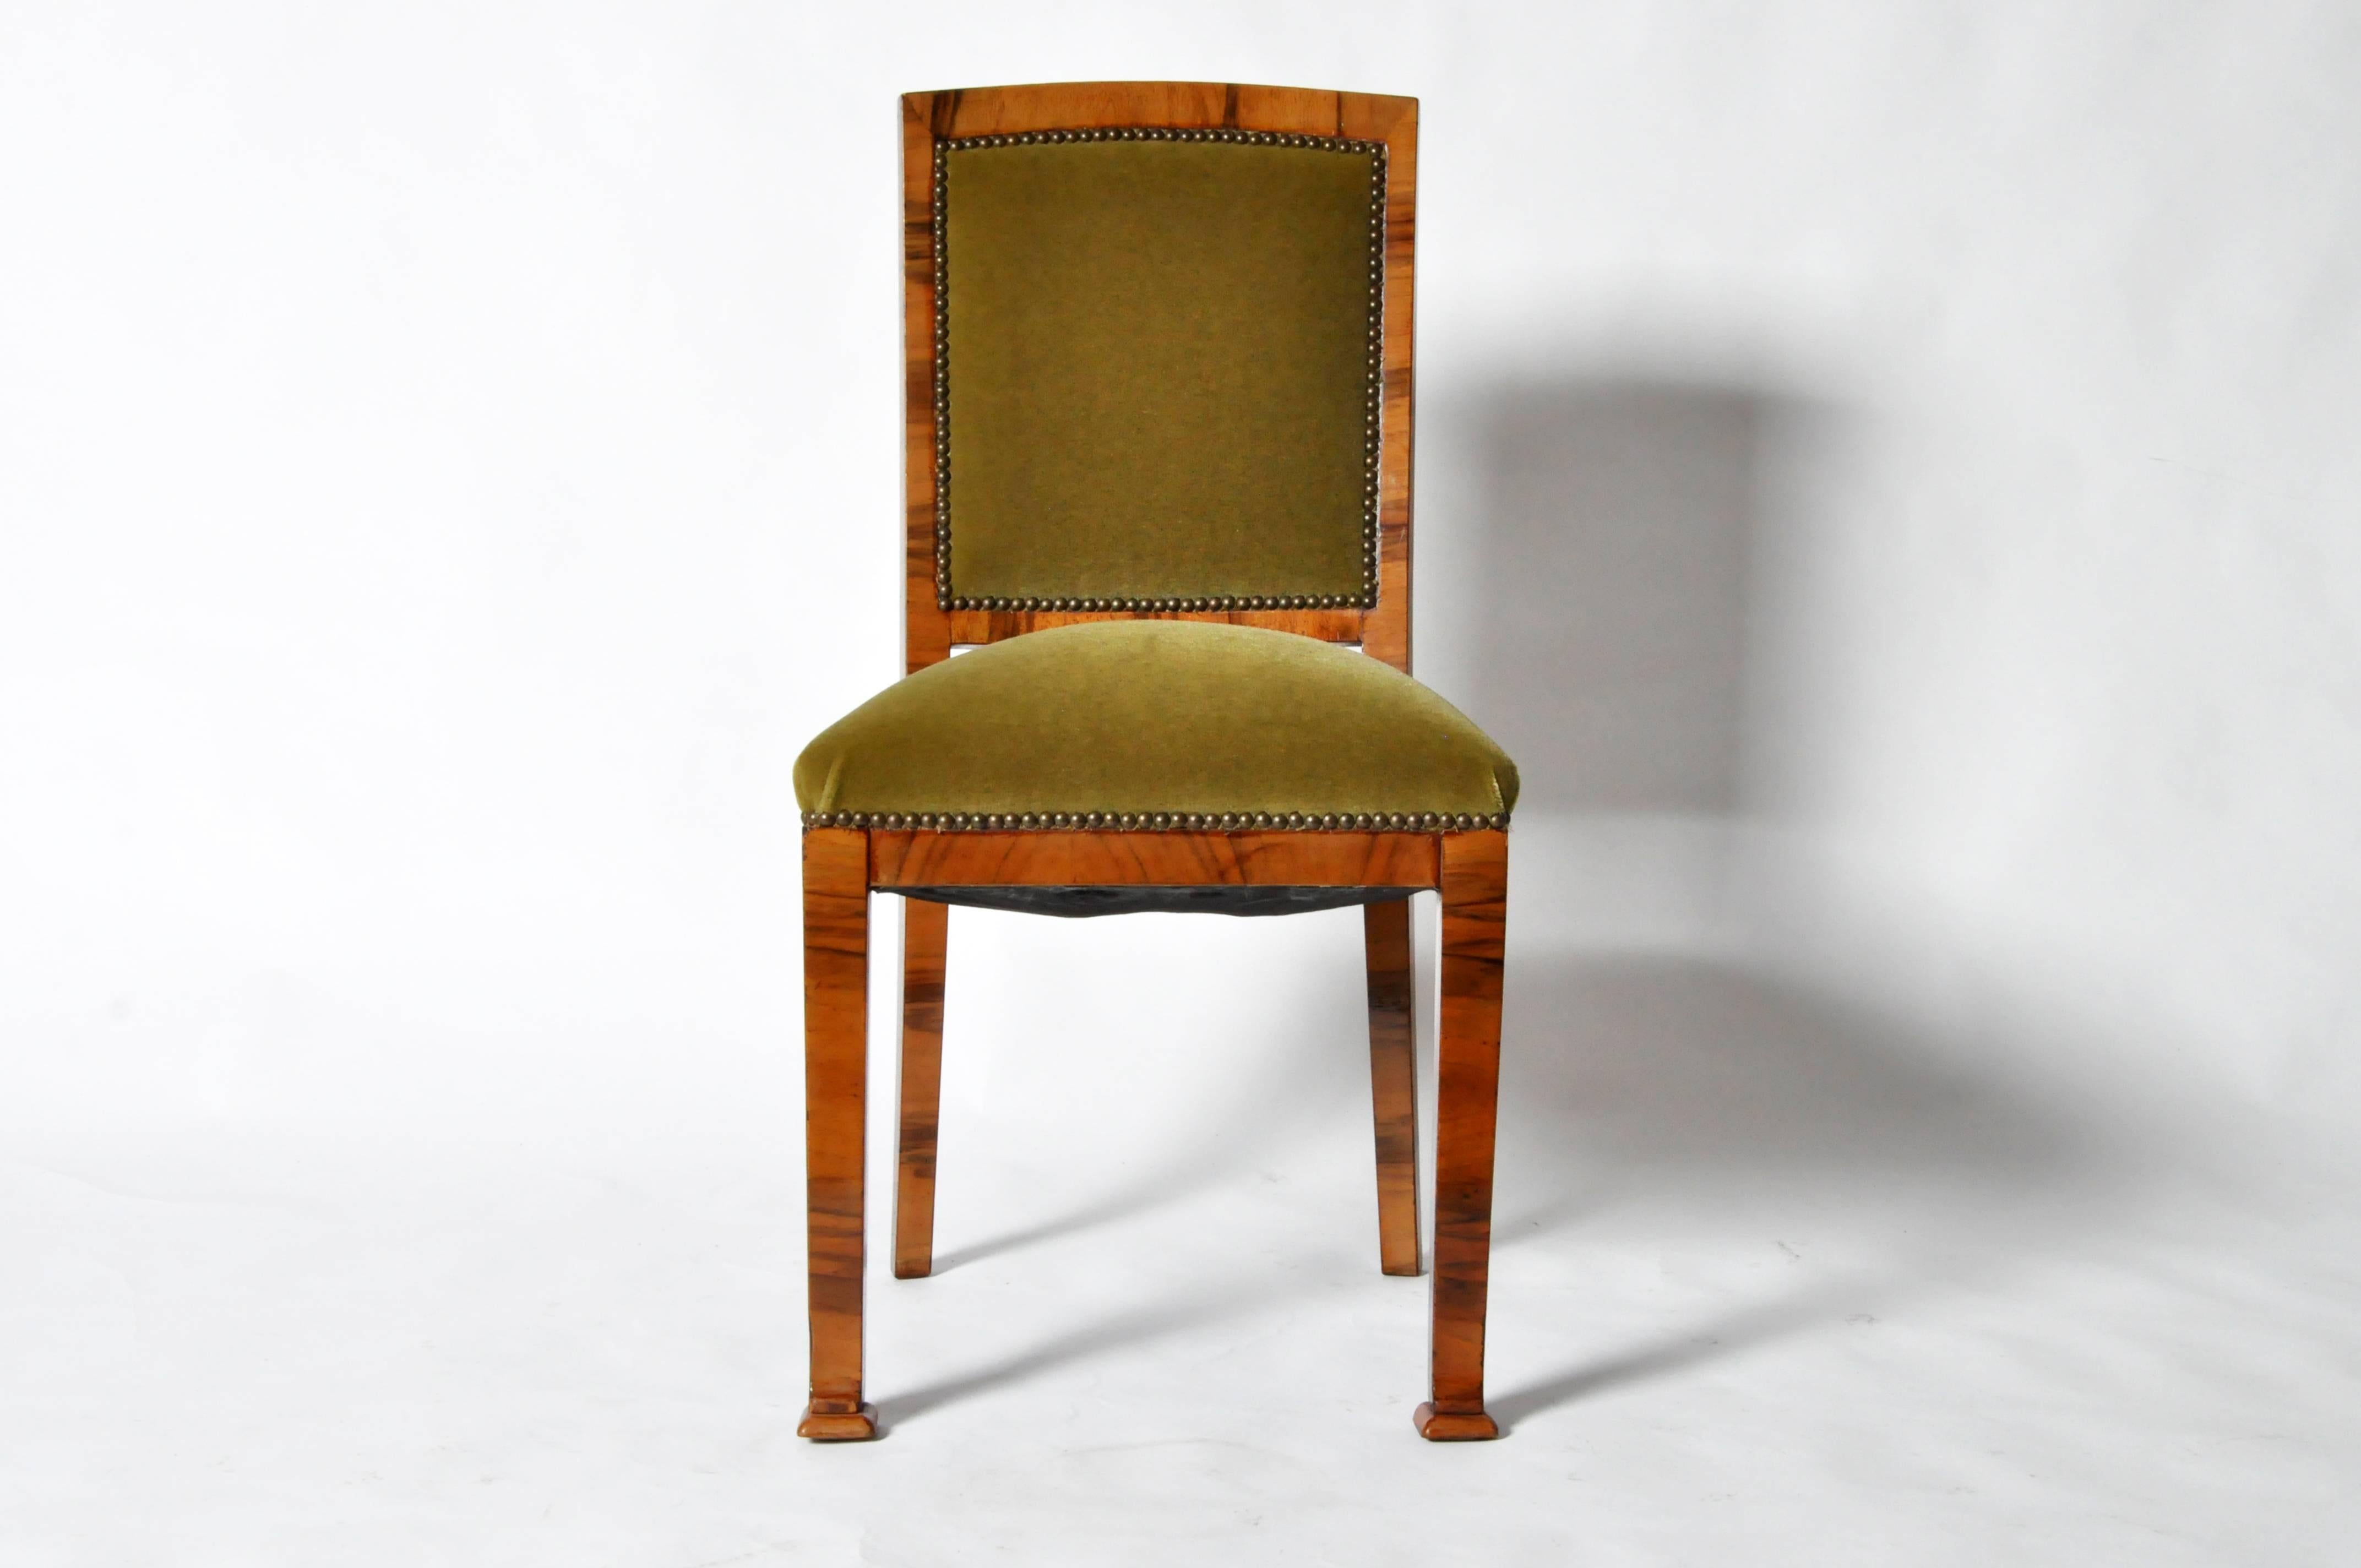 This set of six dining chairs are from Hungary and are made from walnut veneer, circa 1940.